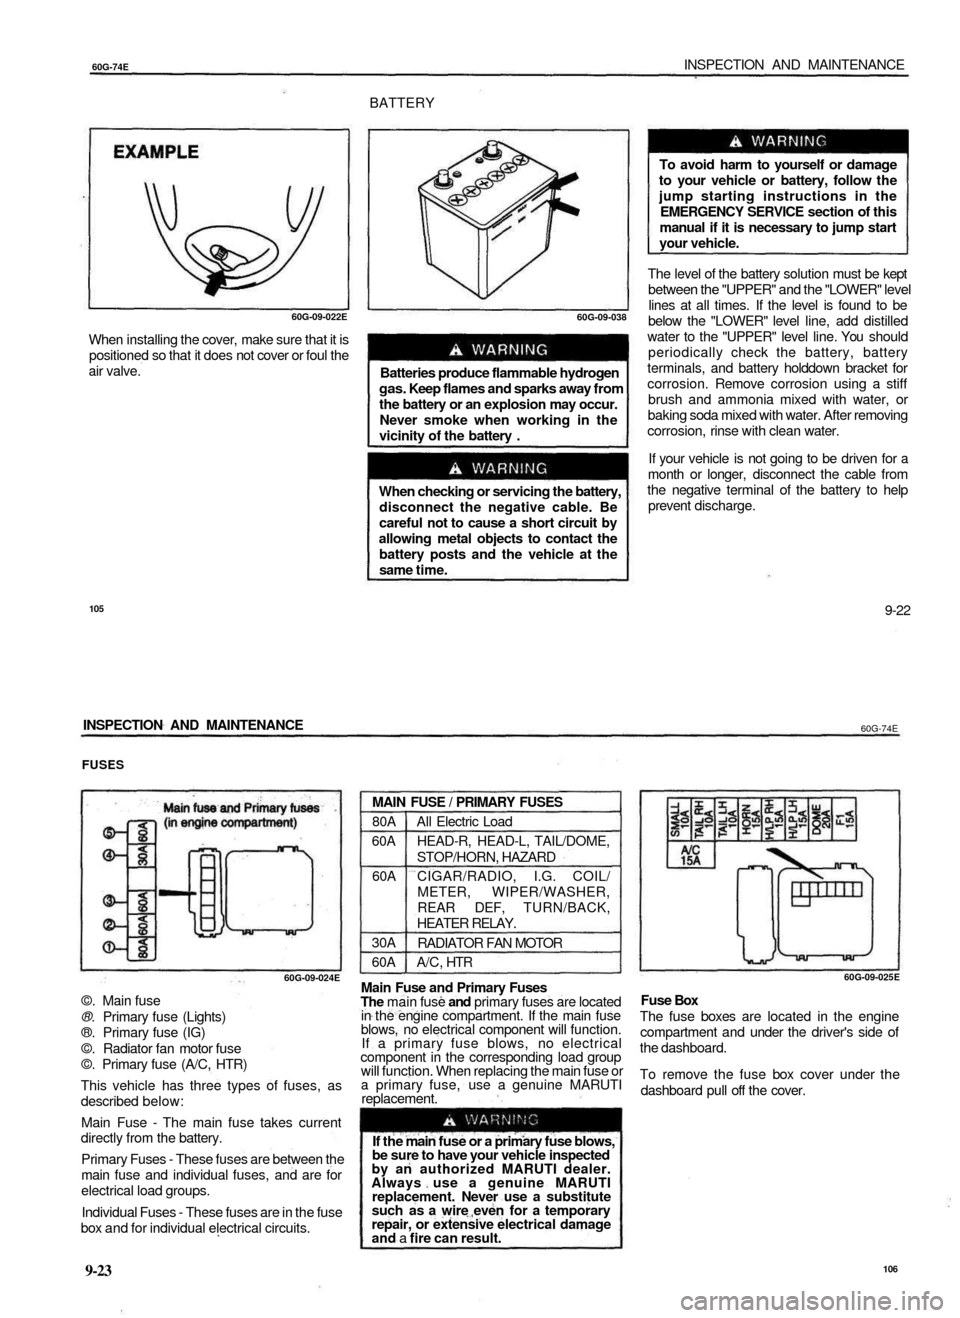 SUZUKI BALENO 1999 1.G Workshop Manual 
60G-74E 
INSPECTION AND MAINTENANCE

BATTERY

60G-09-022E

When installing the cover, make sure that it is

positioned so that it does not cover or foul the

air valve. 
60G-09-038

Batteries produce